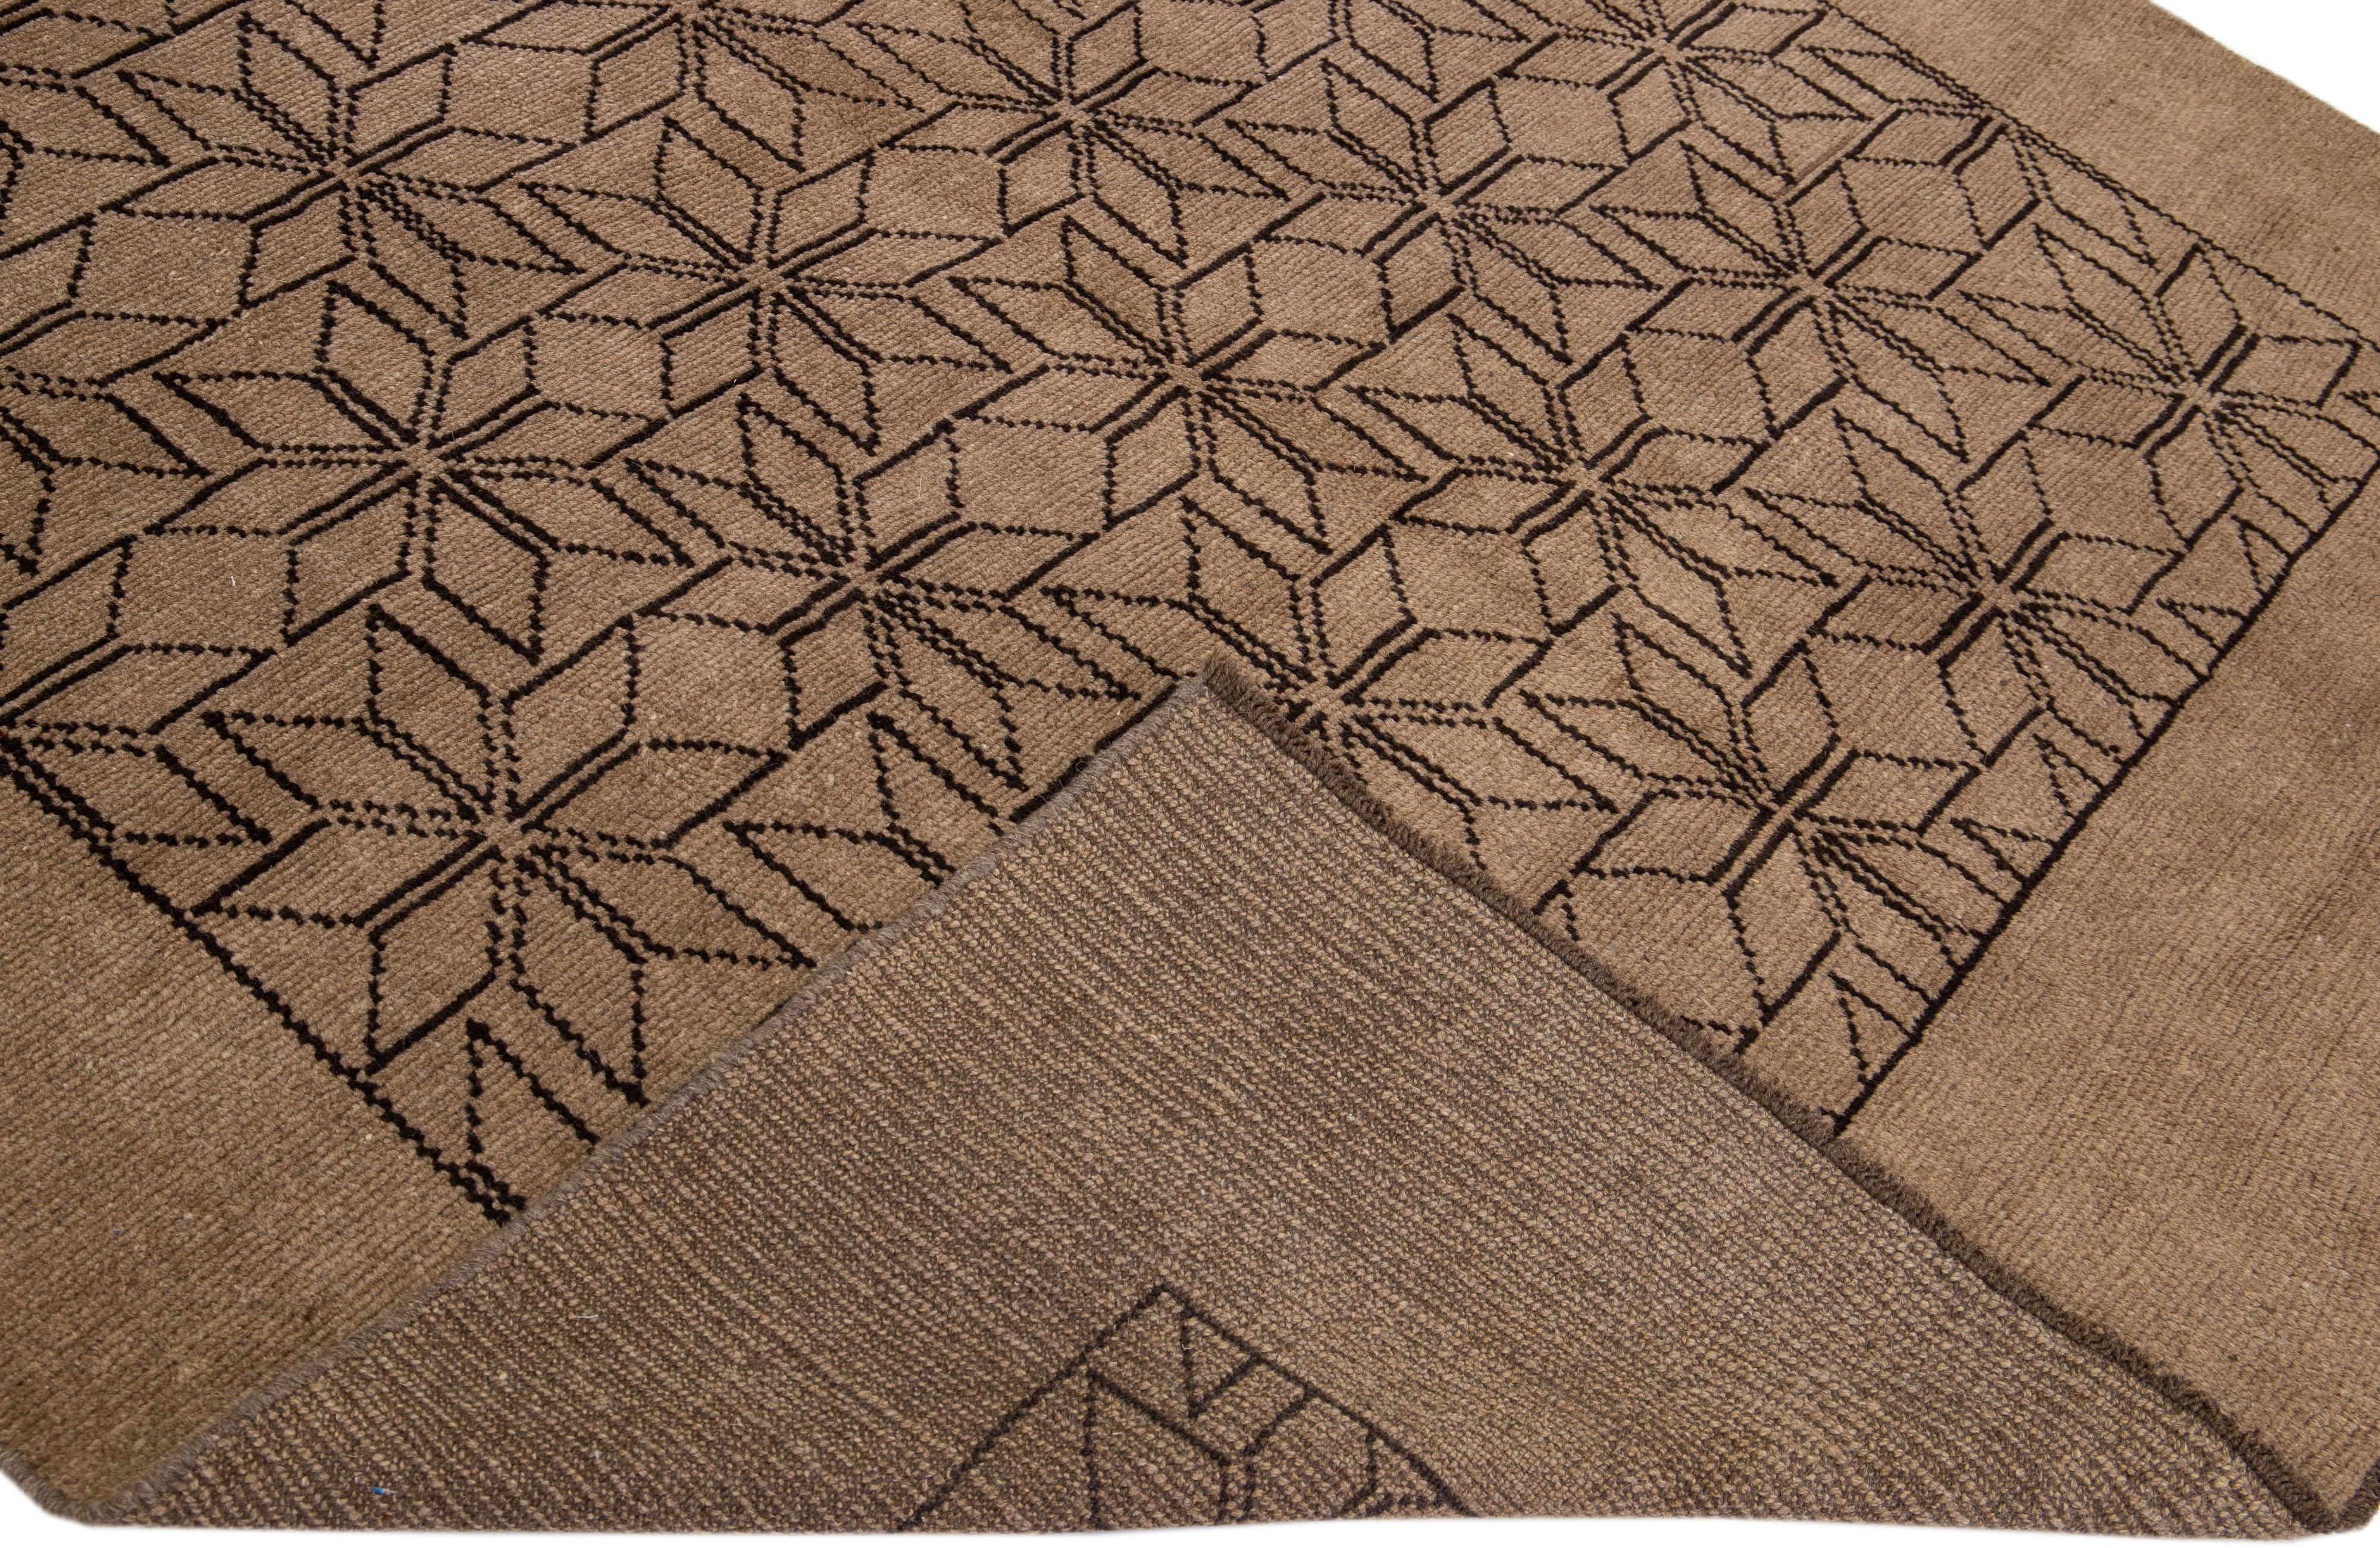 This Beautiful Moroccan-style handmade wool rug makes part of our Northwest collection and features a light brown color field and dark brown accents in a gorgeous geometric tribal design.

This rug measures: 7' x 9'6